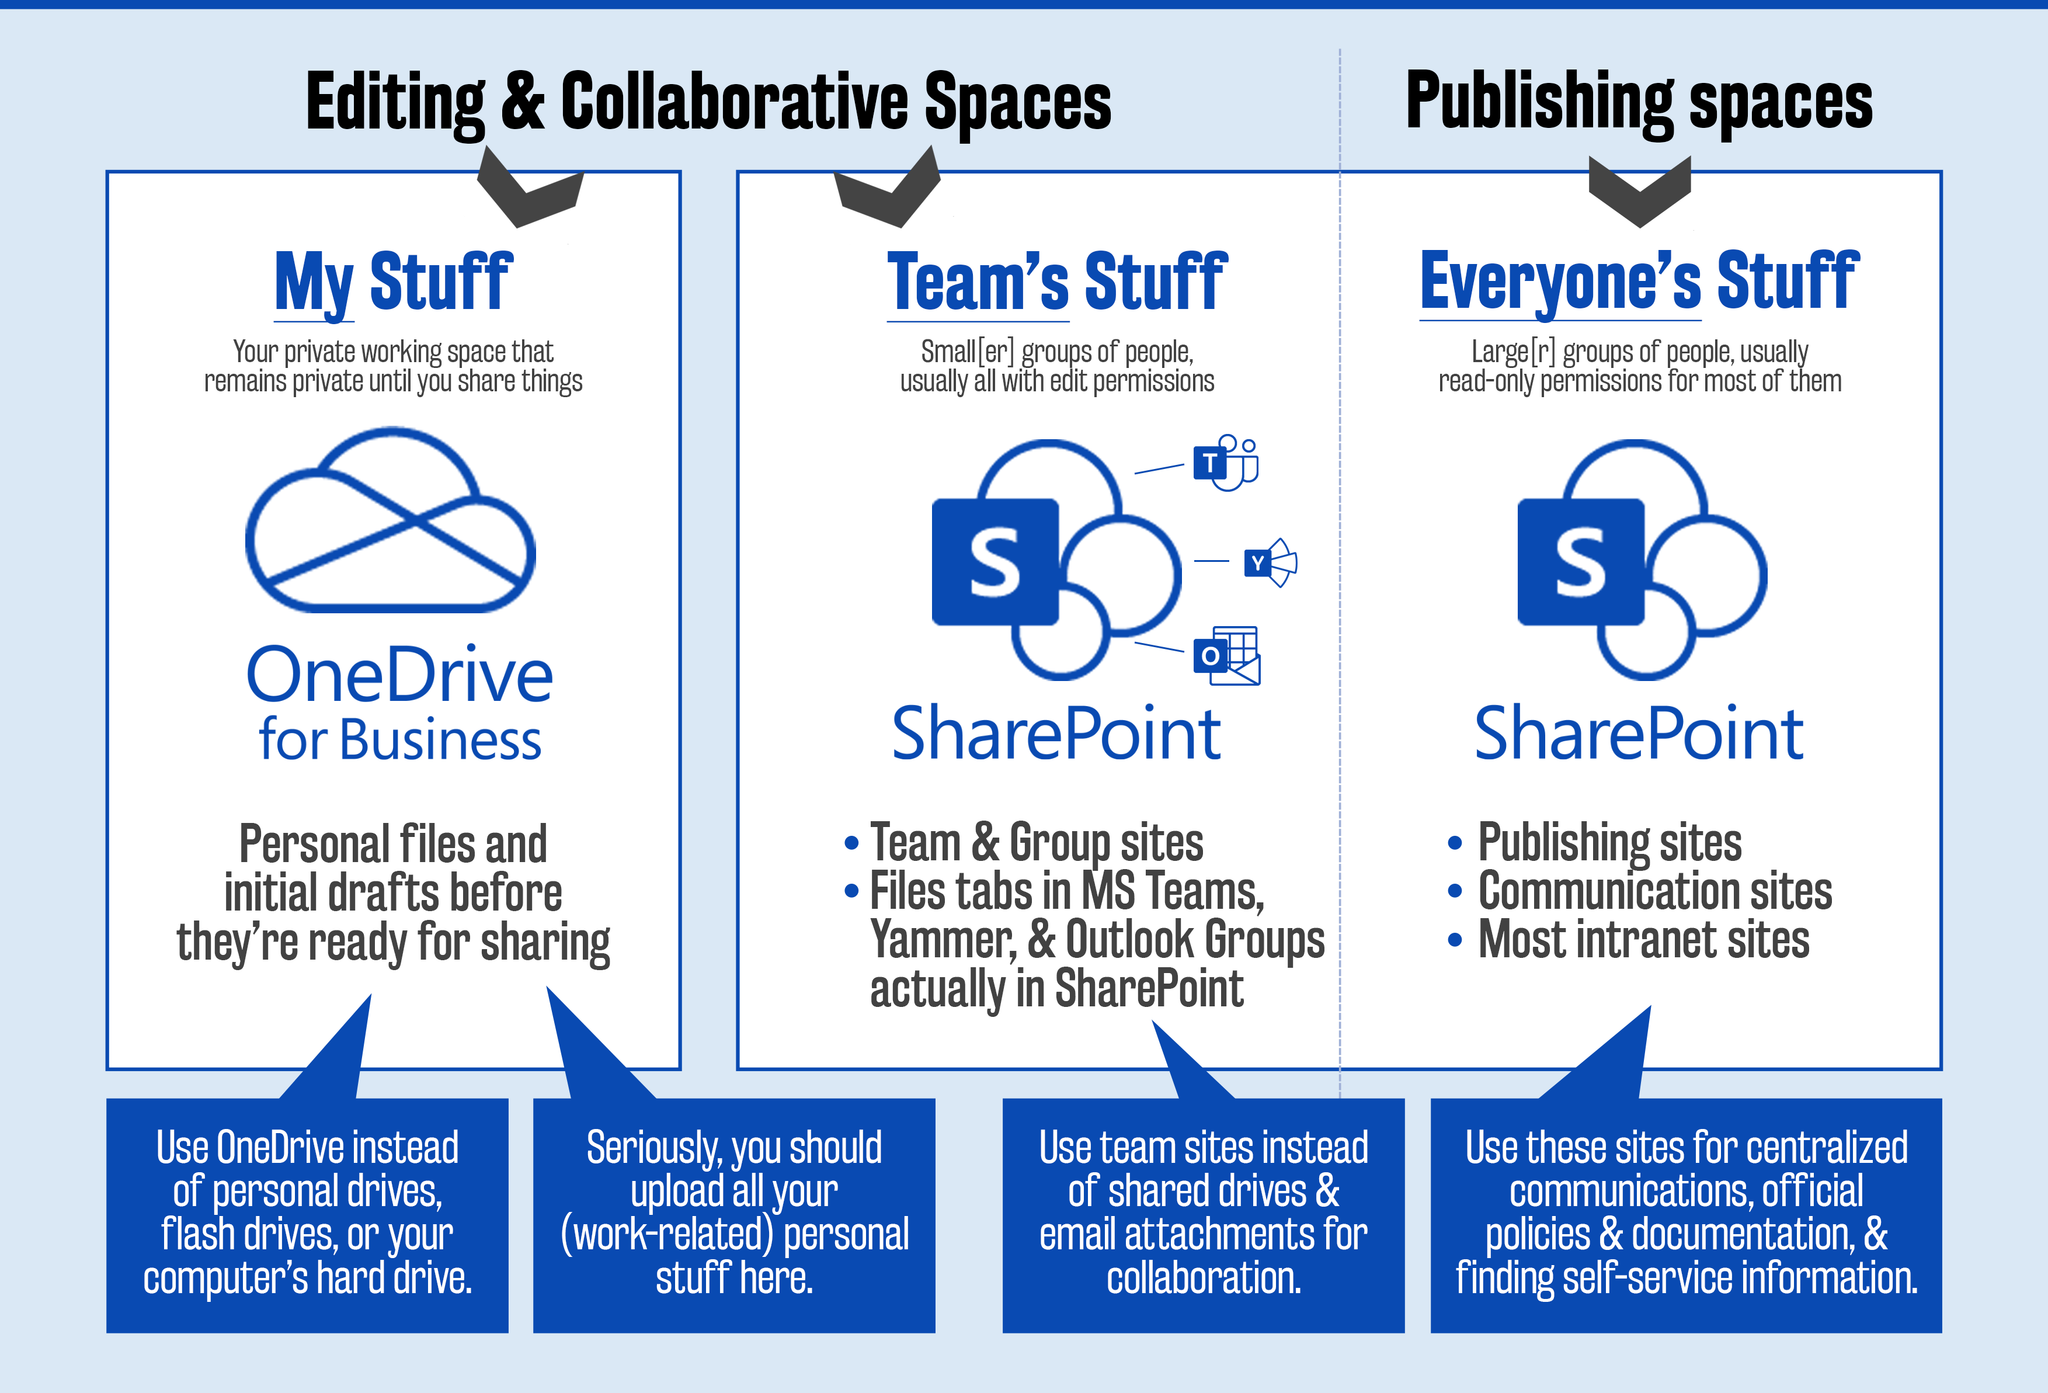 How Does Onedrive And Sharepoint Work Together?